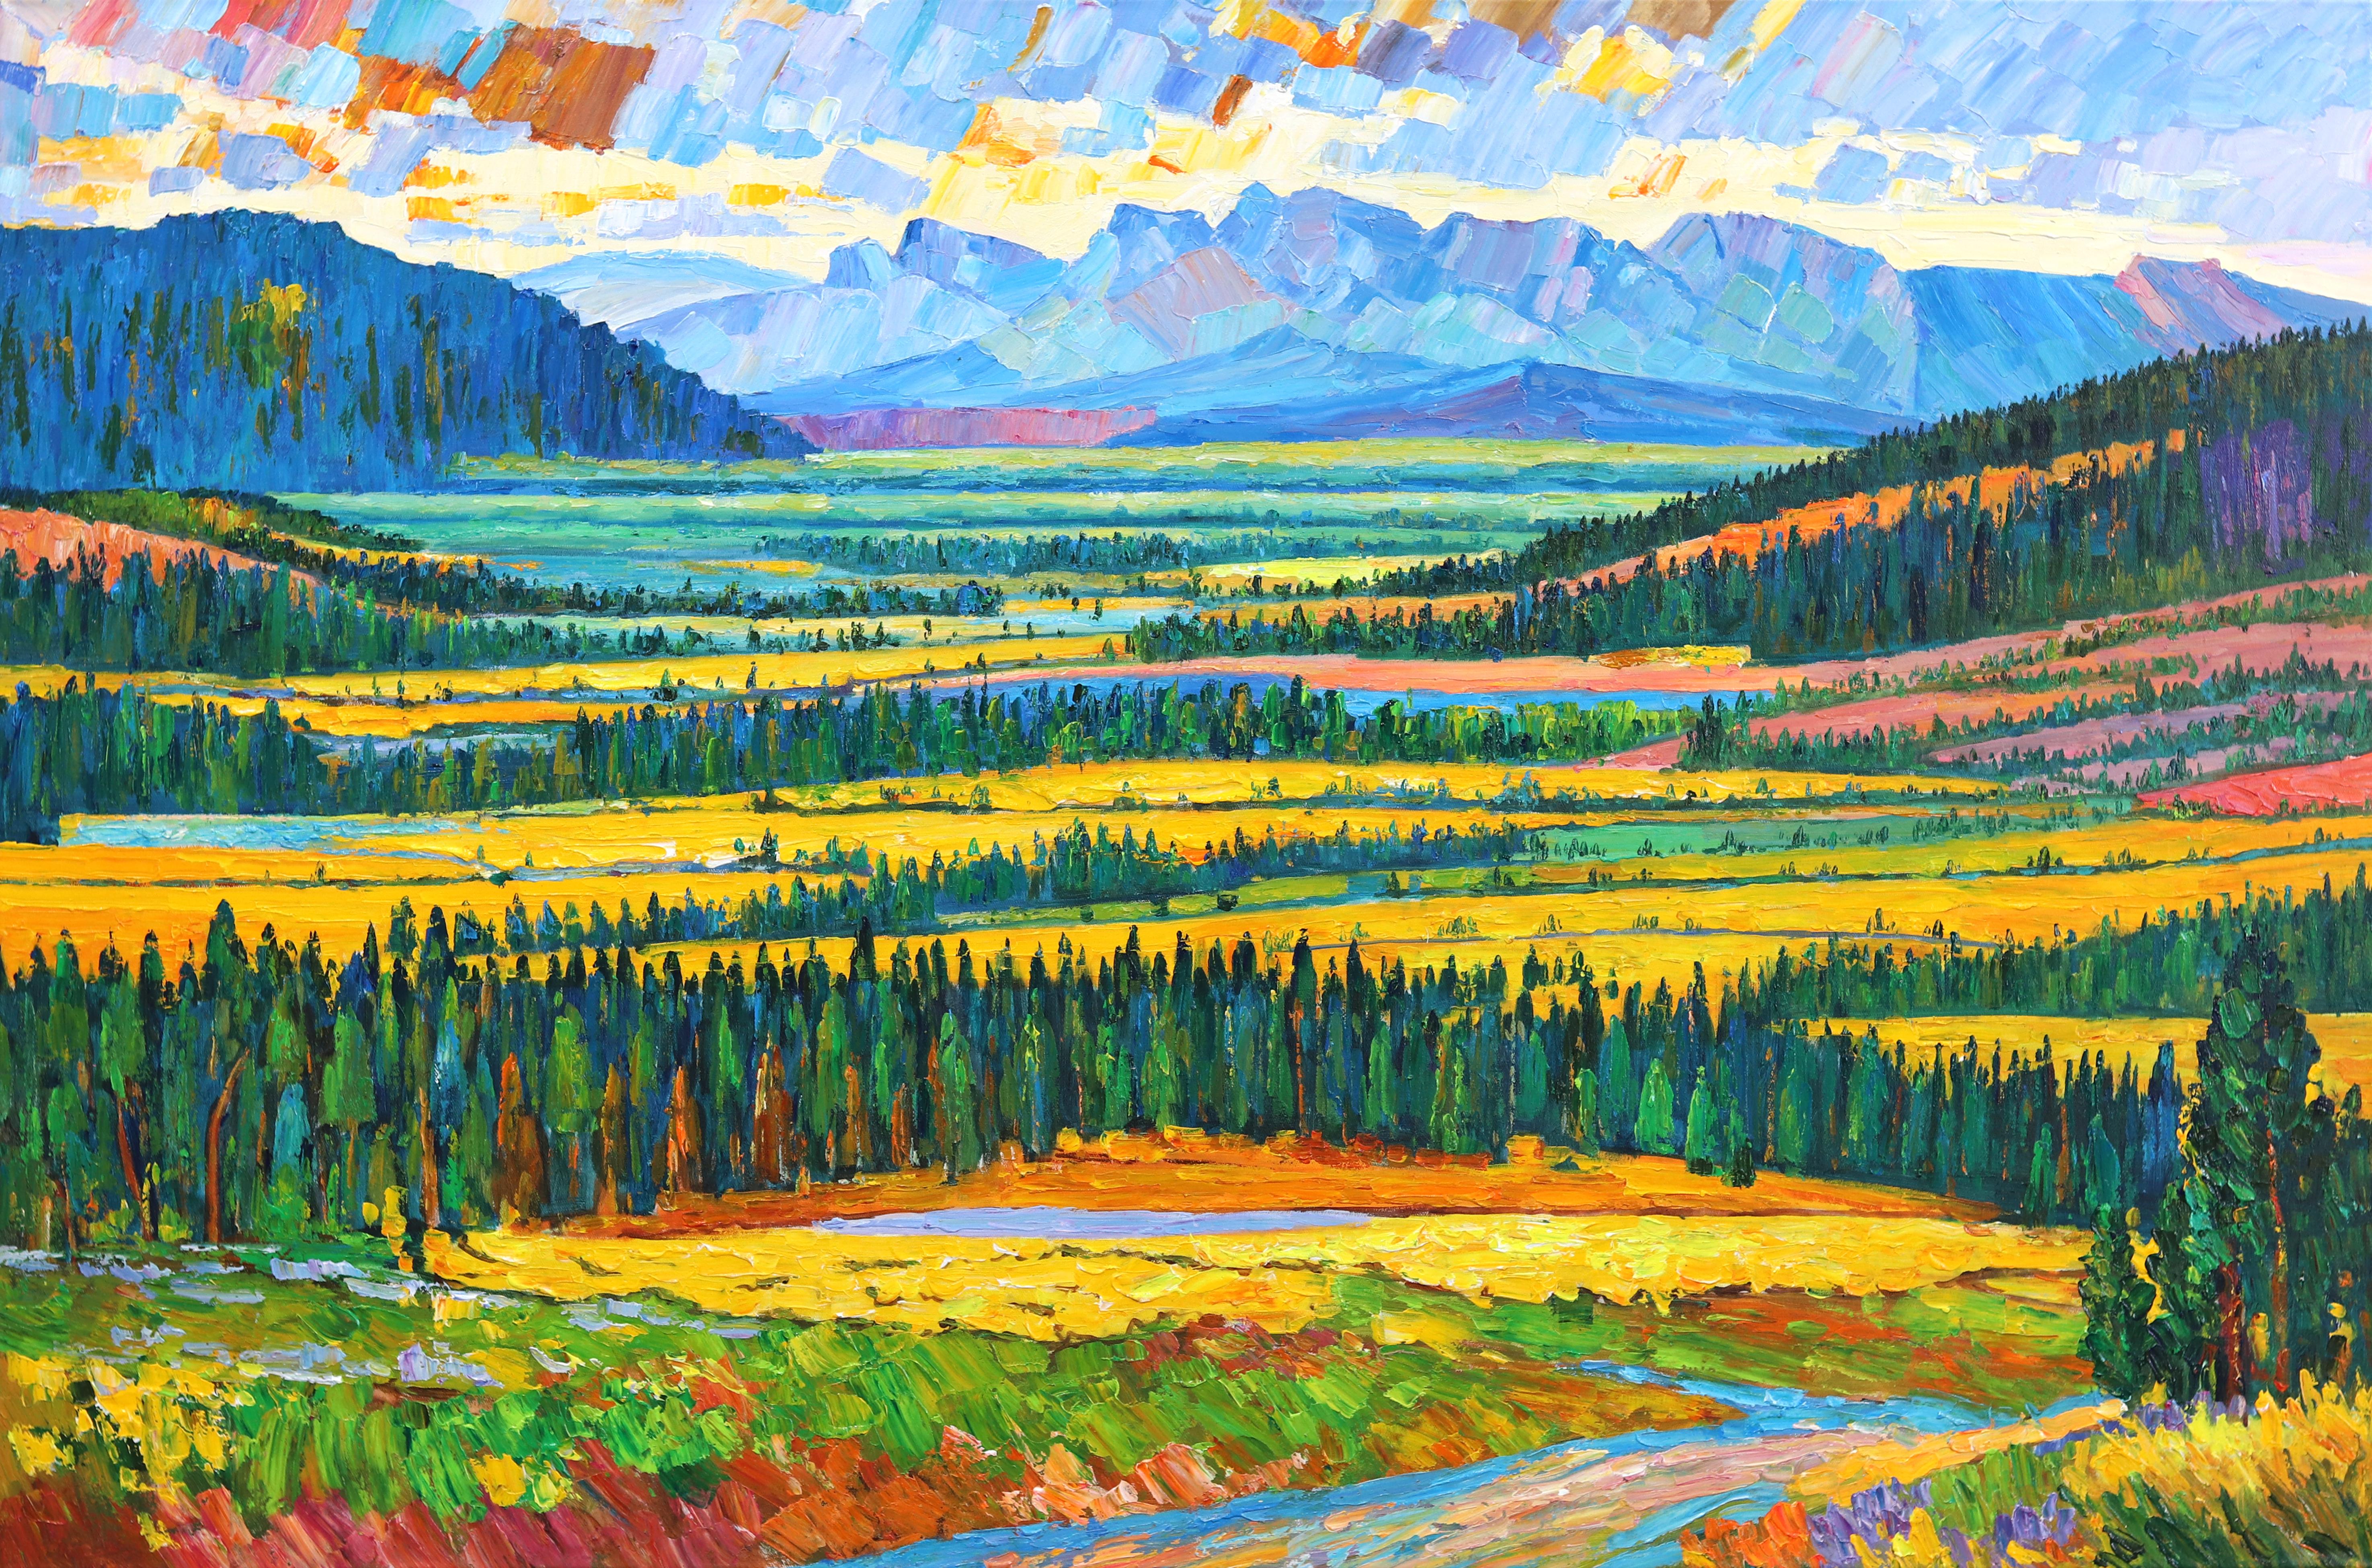 Over the Valley and Mountain - Impressionist Landscape Vibrant Painting